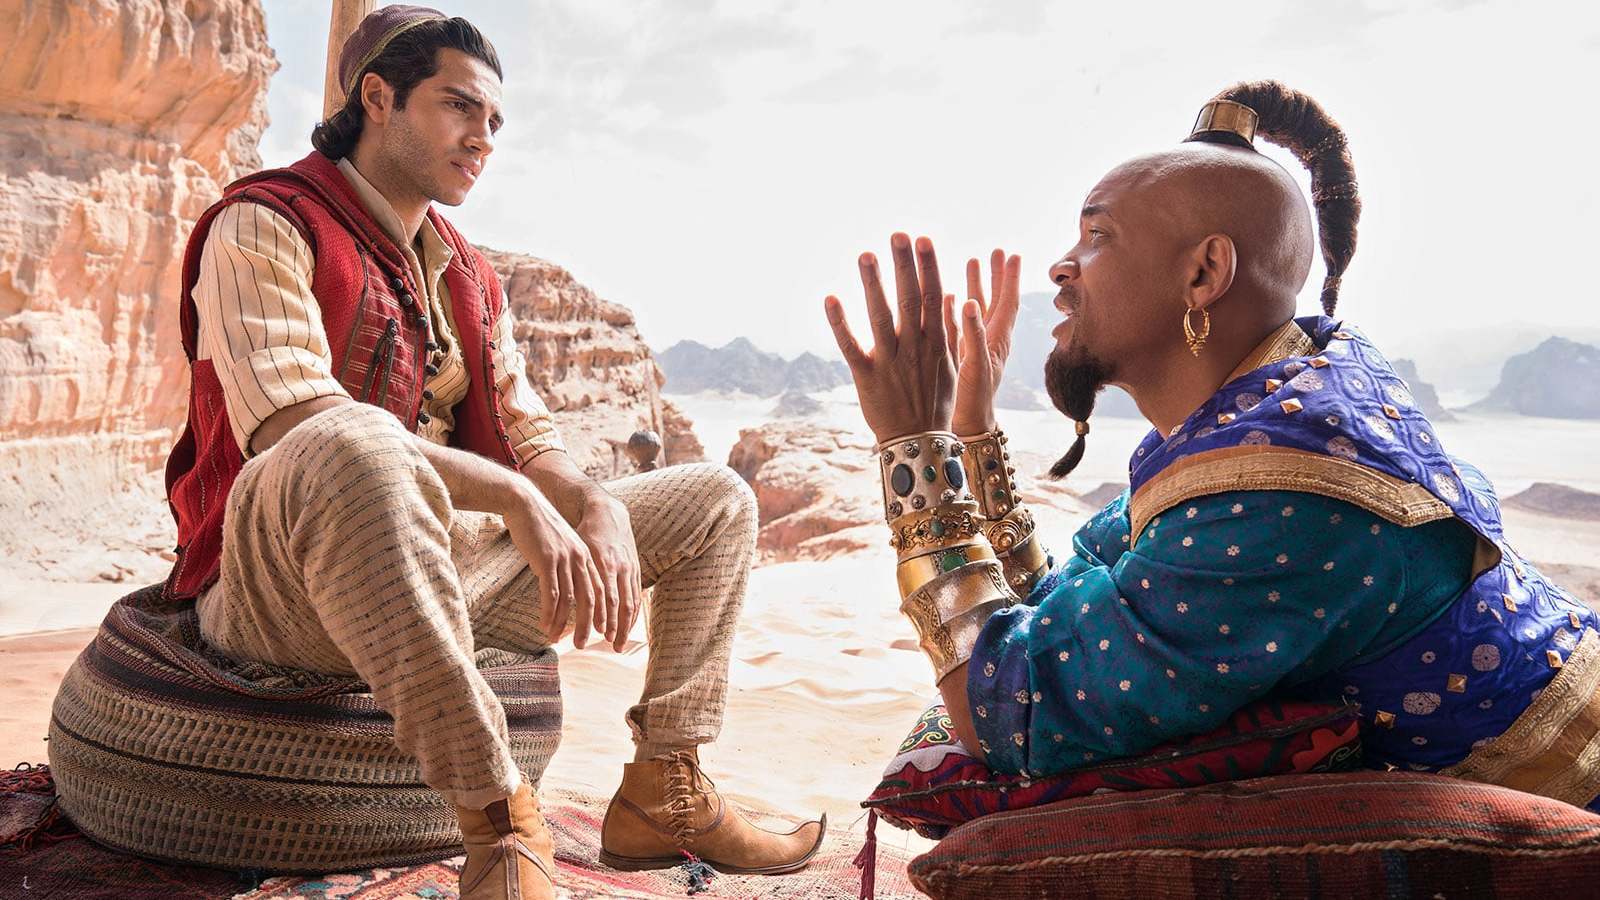 Aladdin and the Genie in live-action